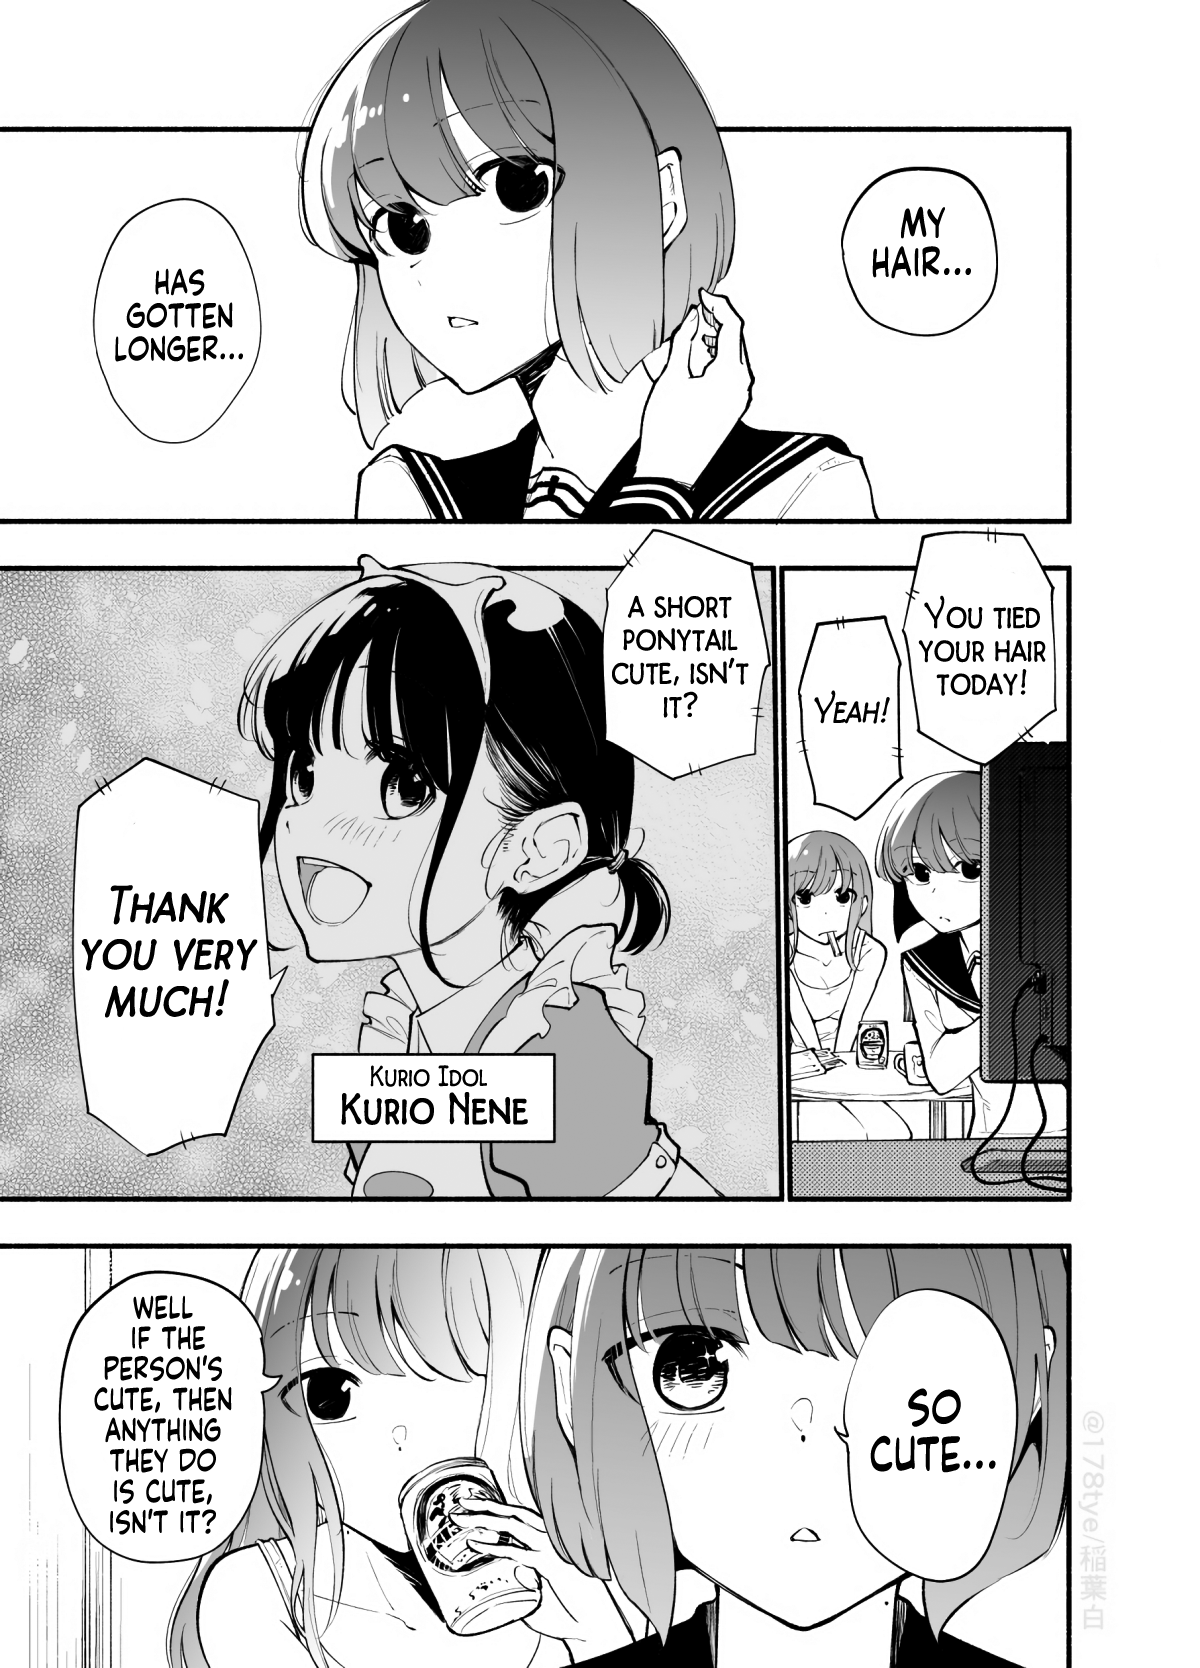 Until The Tall Kouhai (♀) And The Short Senpai (♂) Relationship Develops Into Romance - Page 1